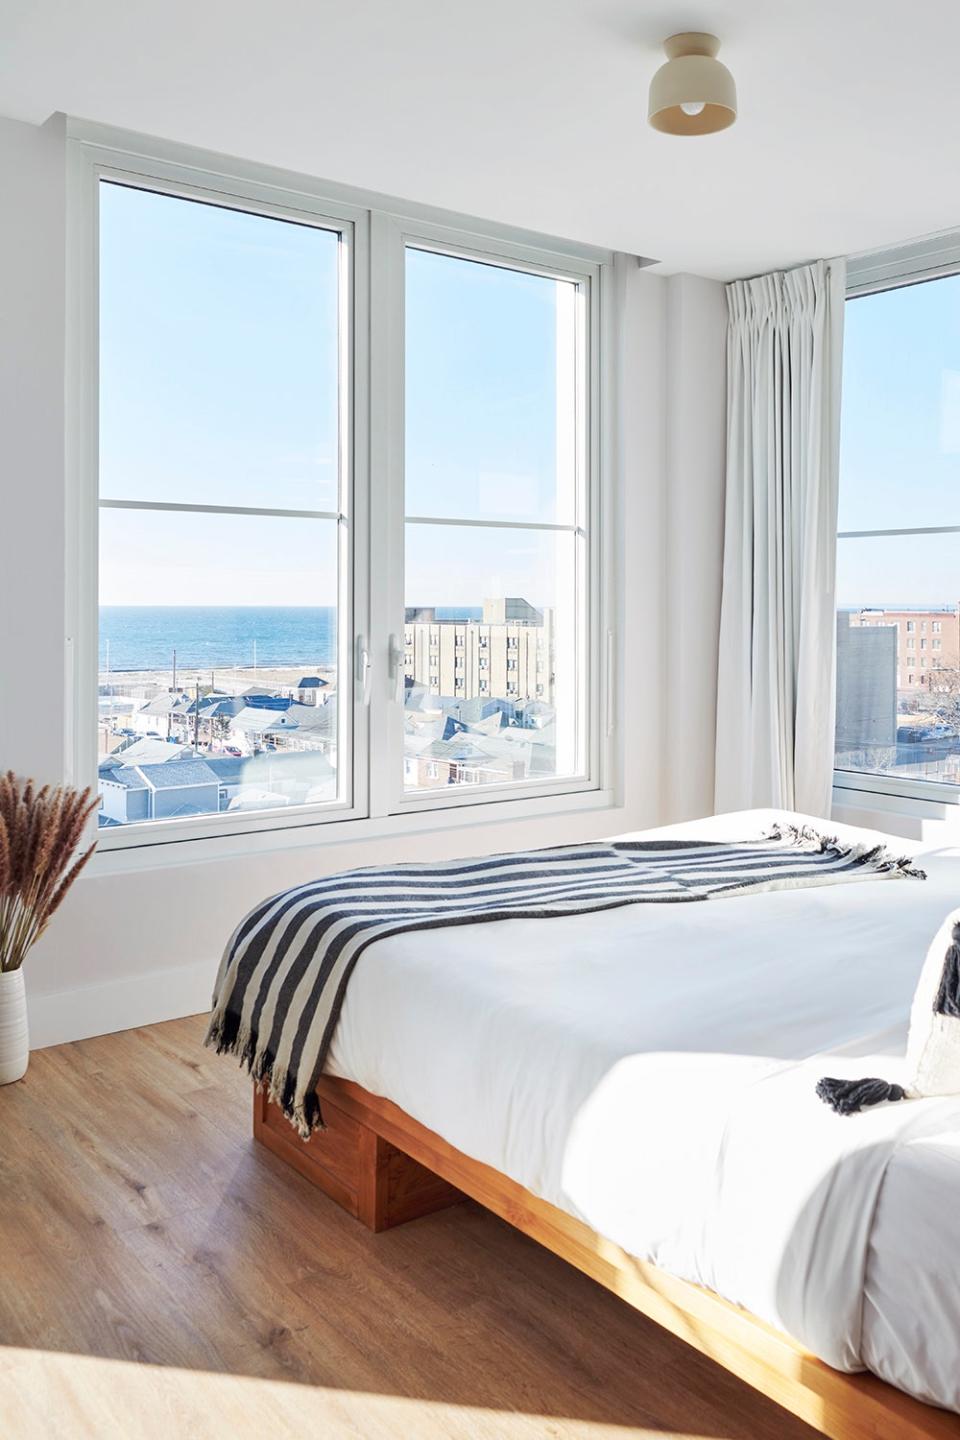 There are 53 beach-chic rooms at the Rockaway Hotel, whose six-story rise makes it easy to see the sea from higher floors.